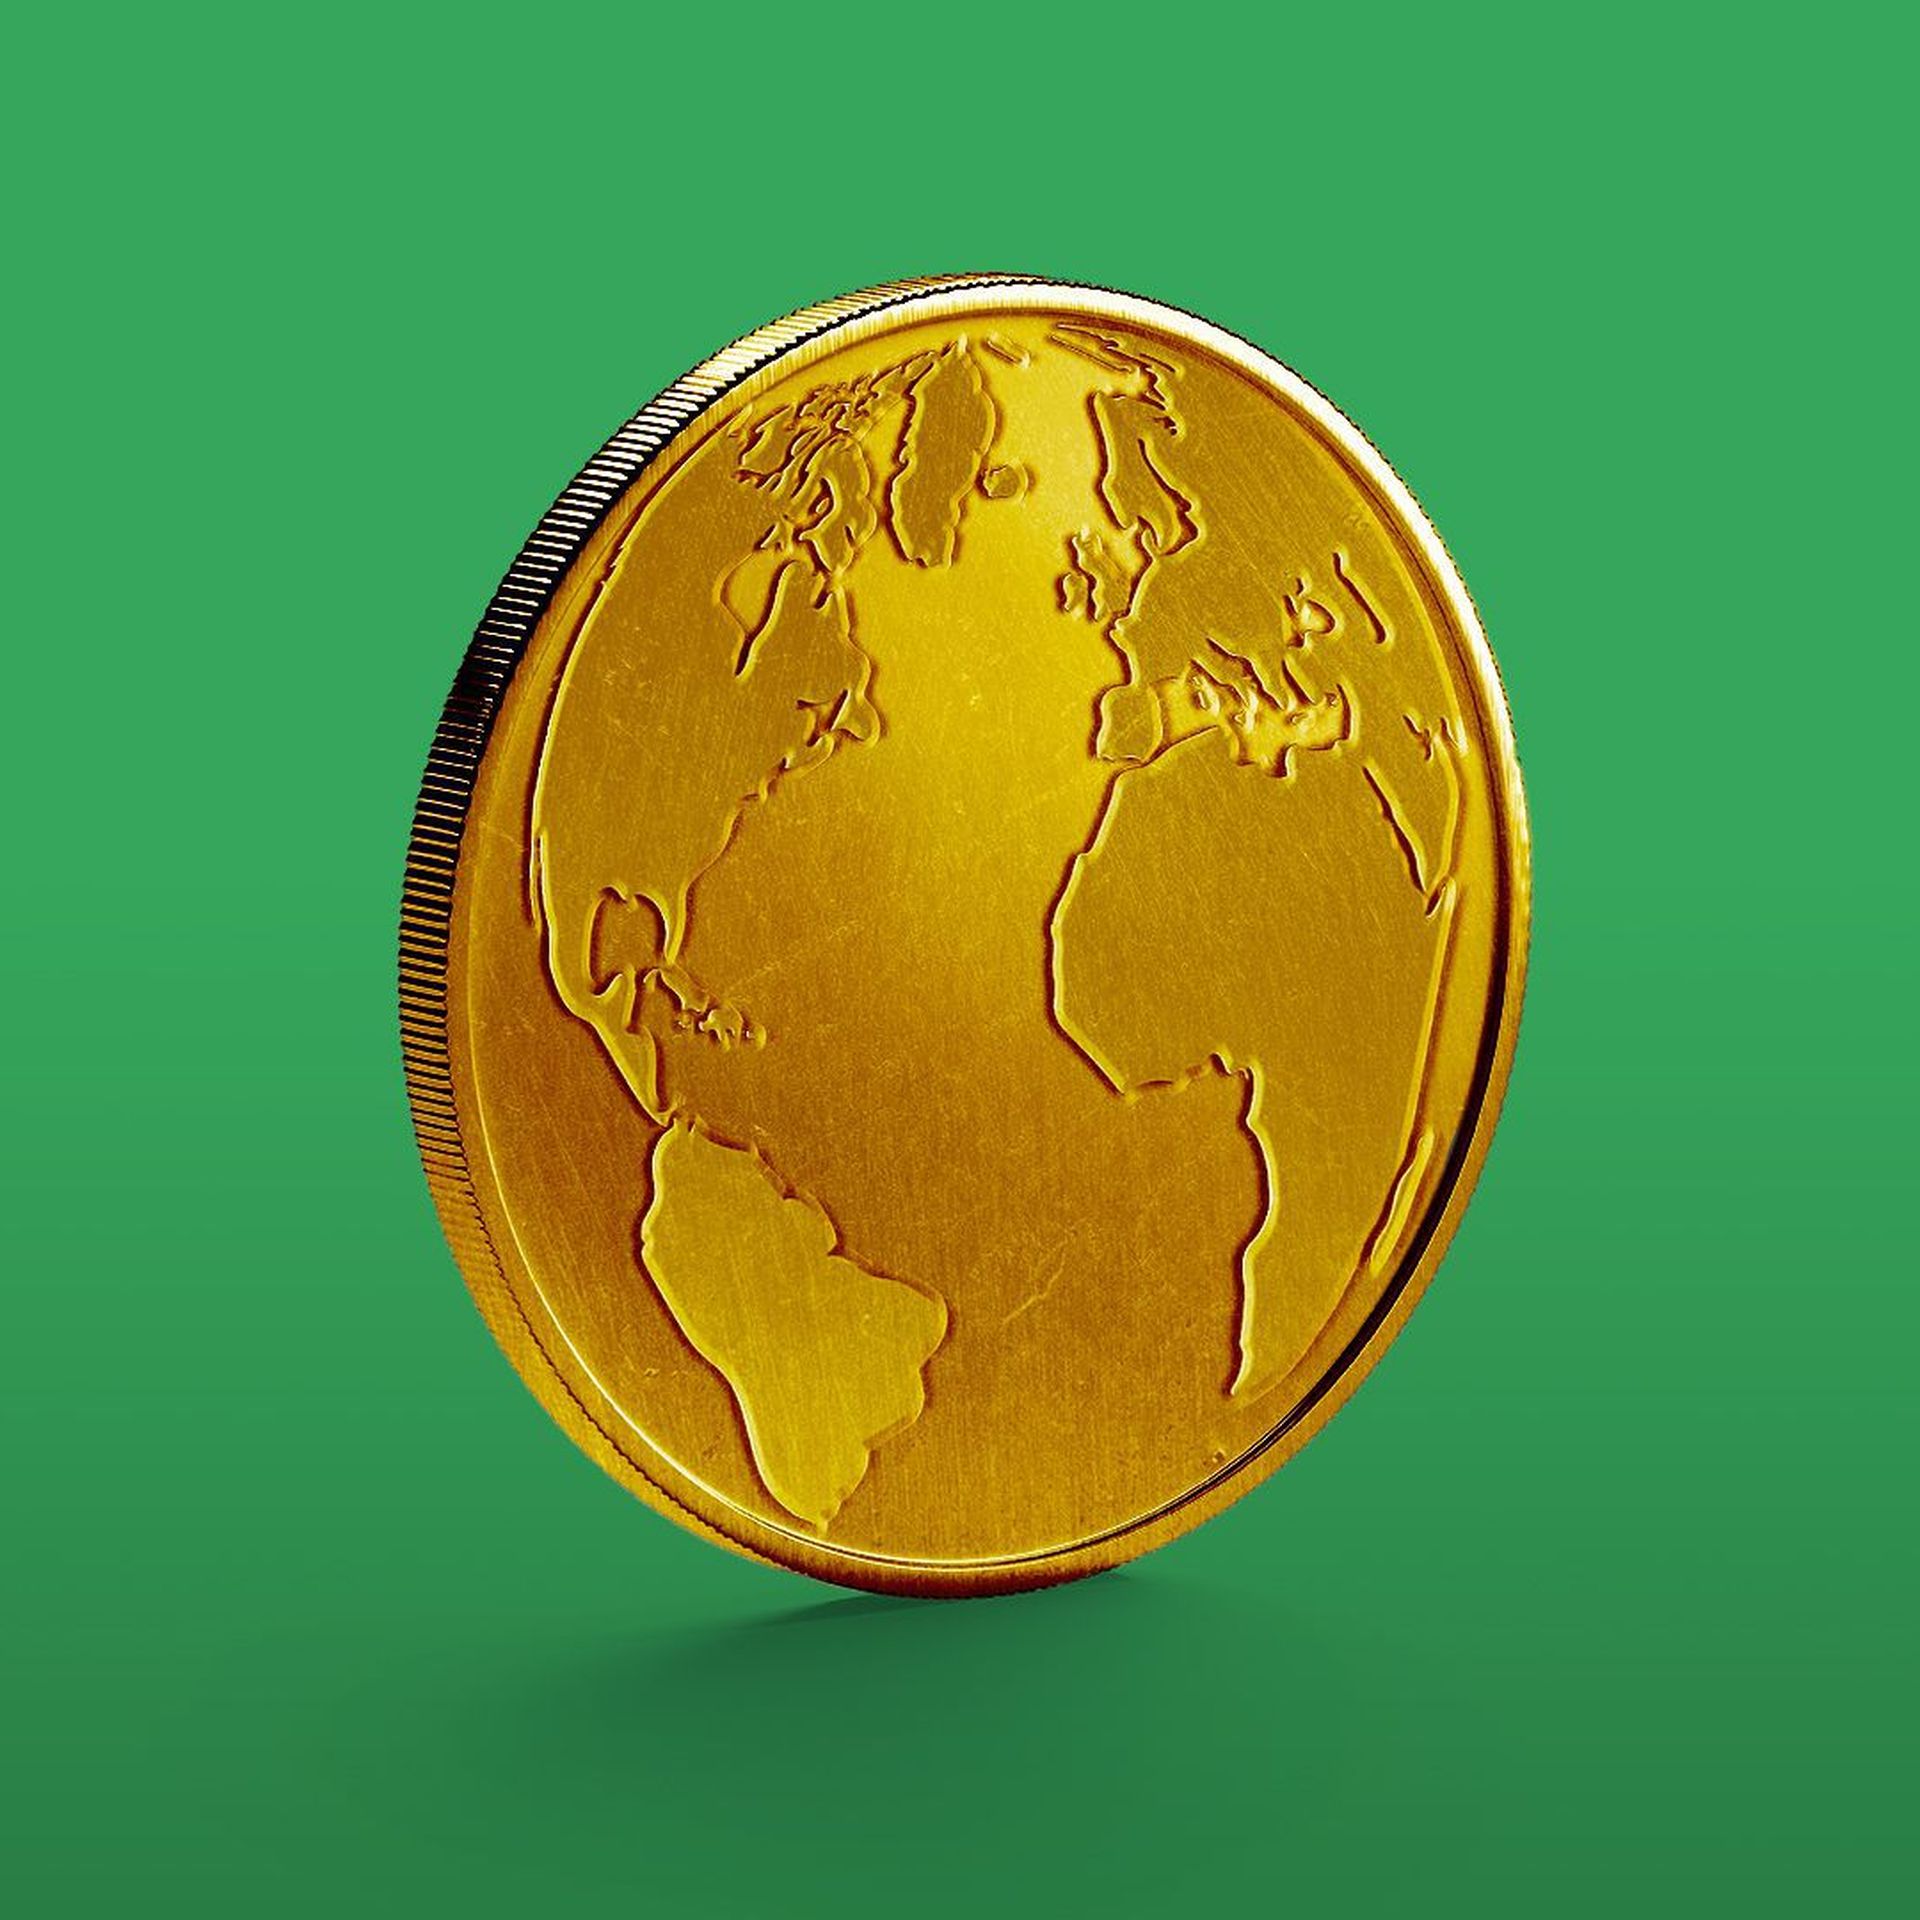 Globe on gold coin and green background